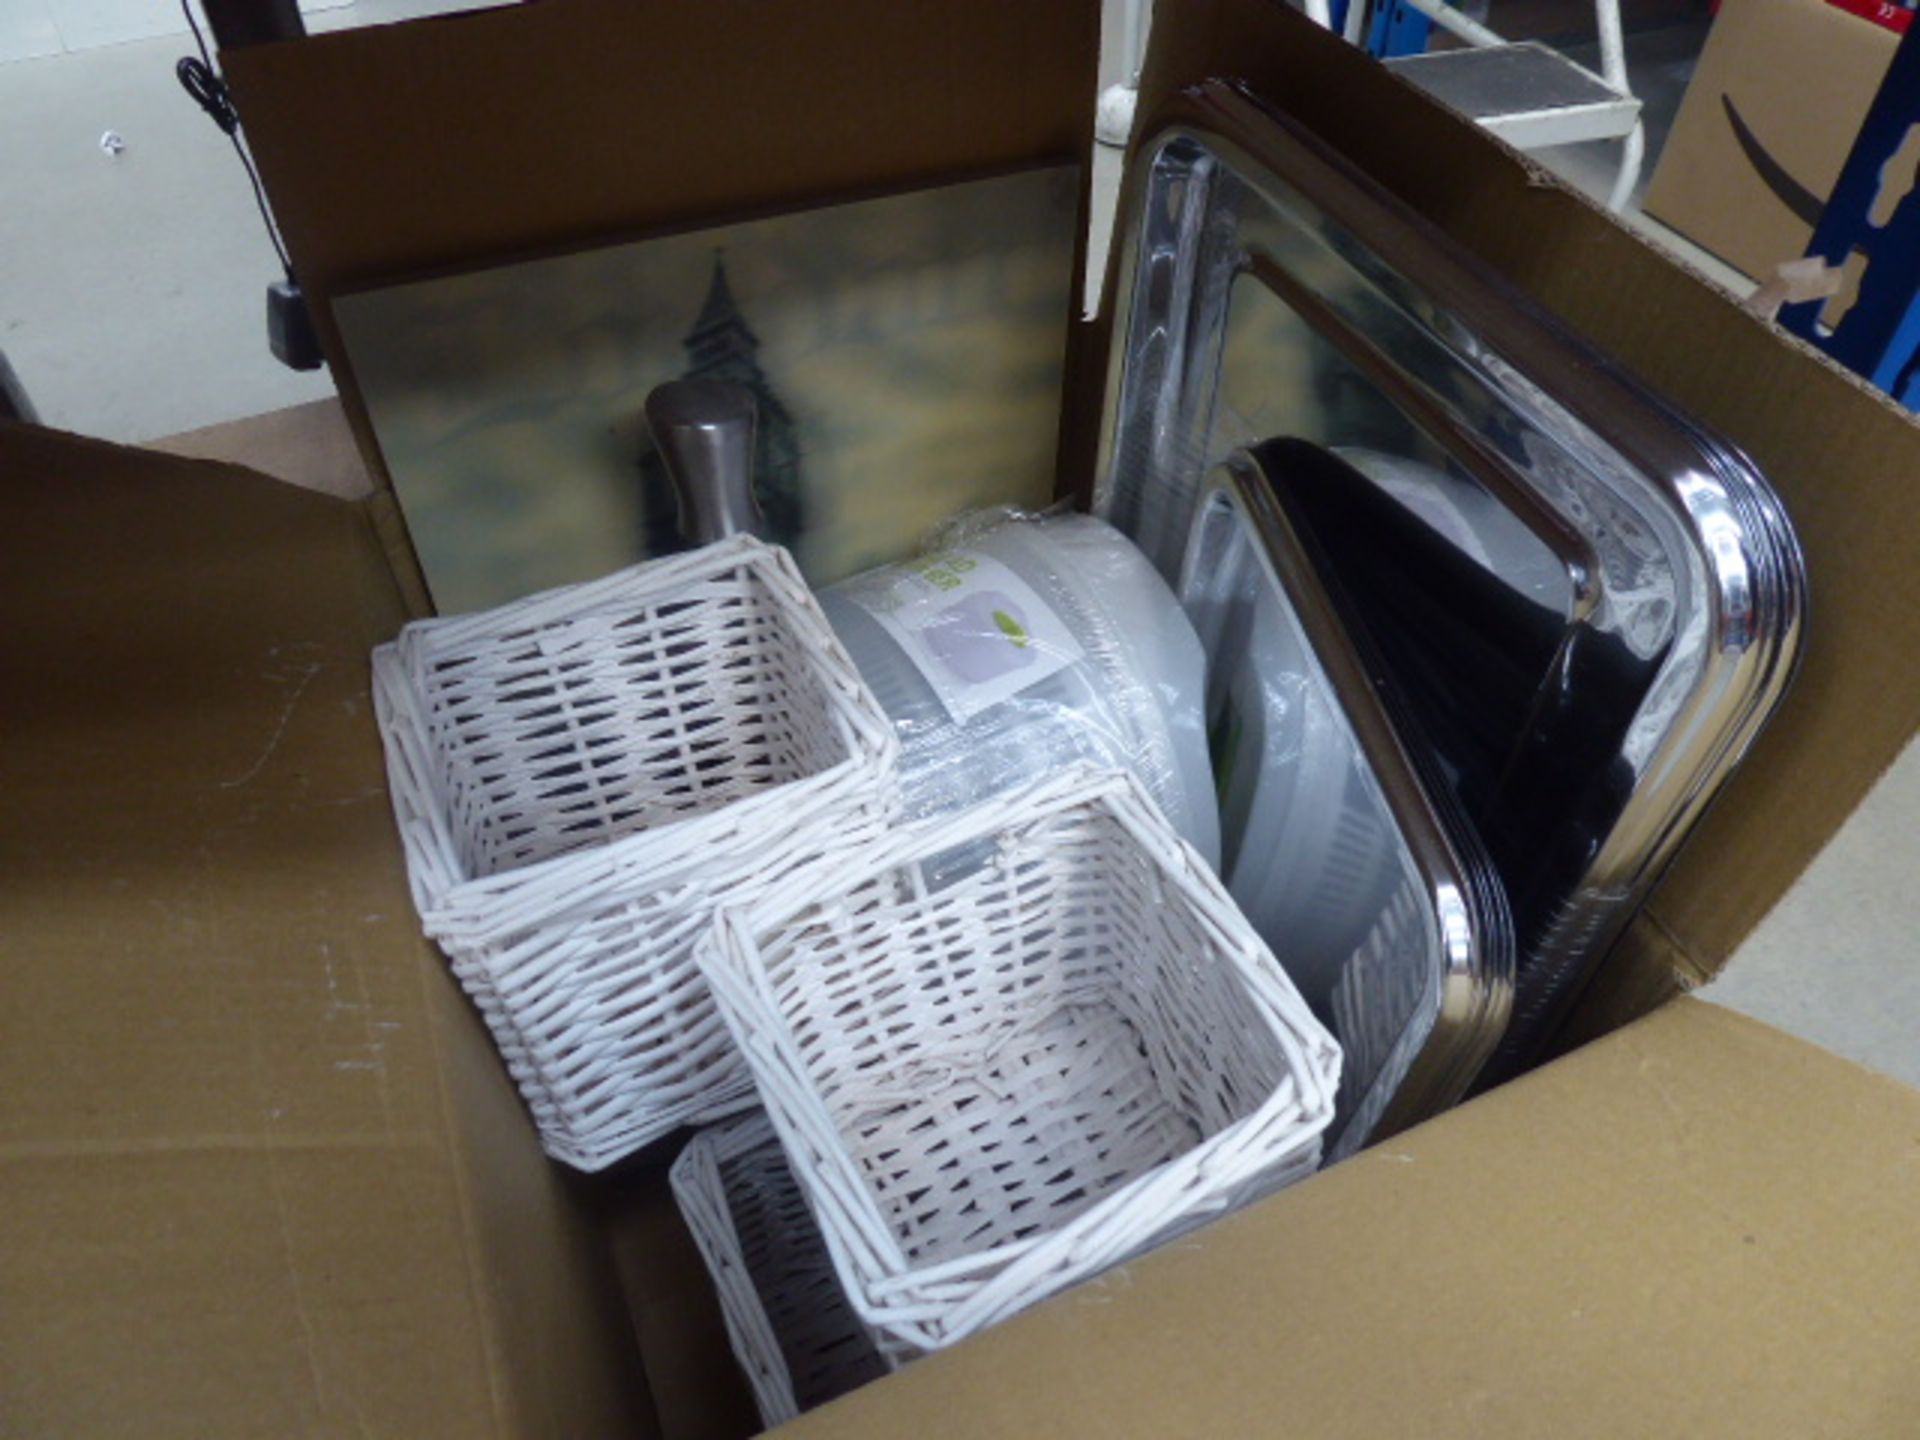 Box containing containing a salad spinner, serving trays, small storage boxes, etc